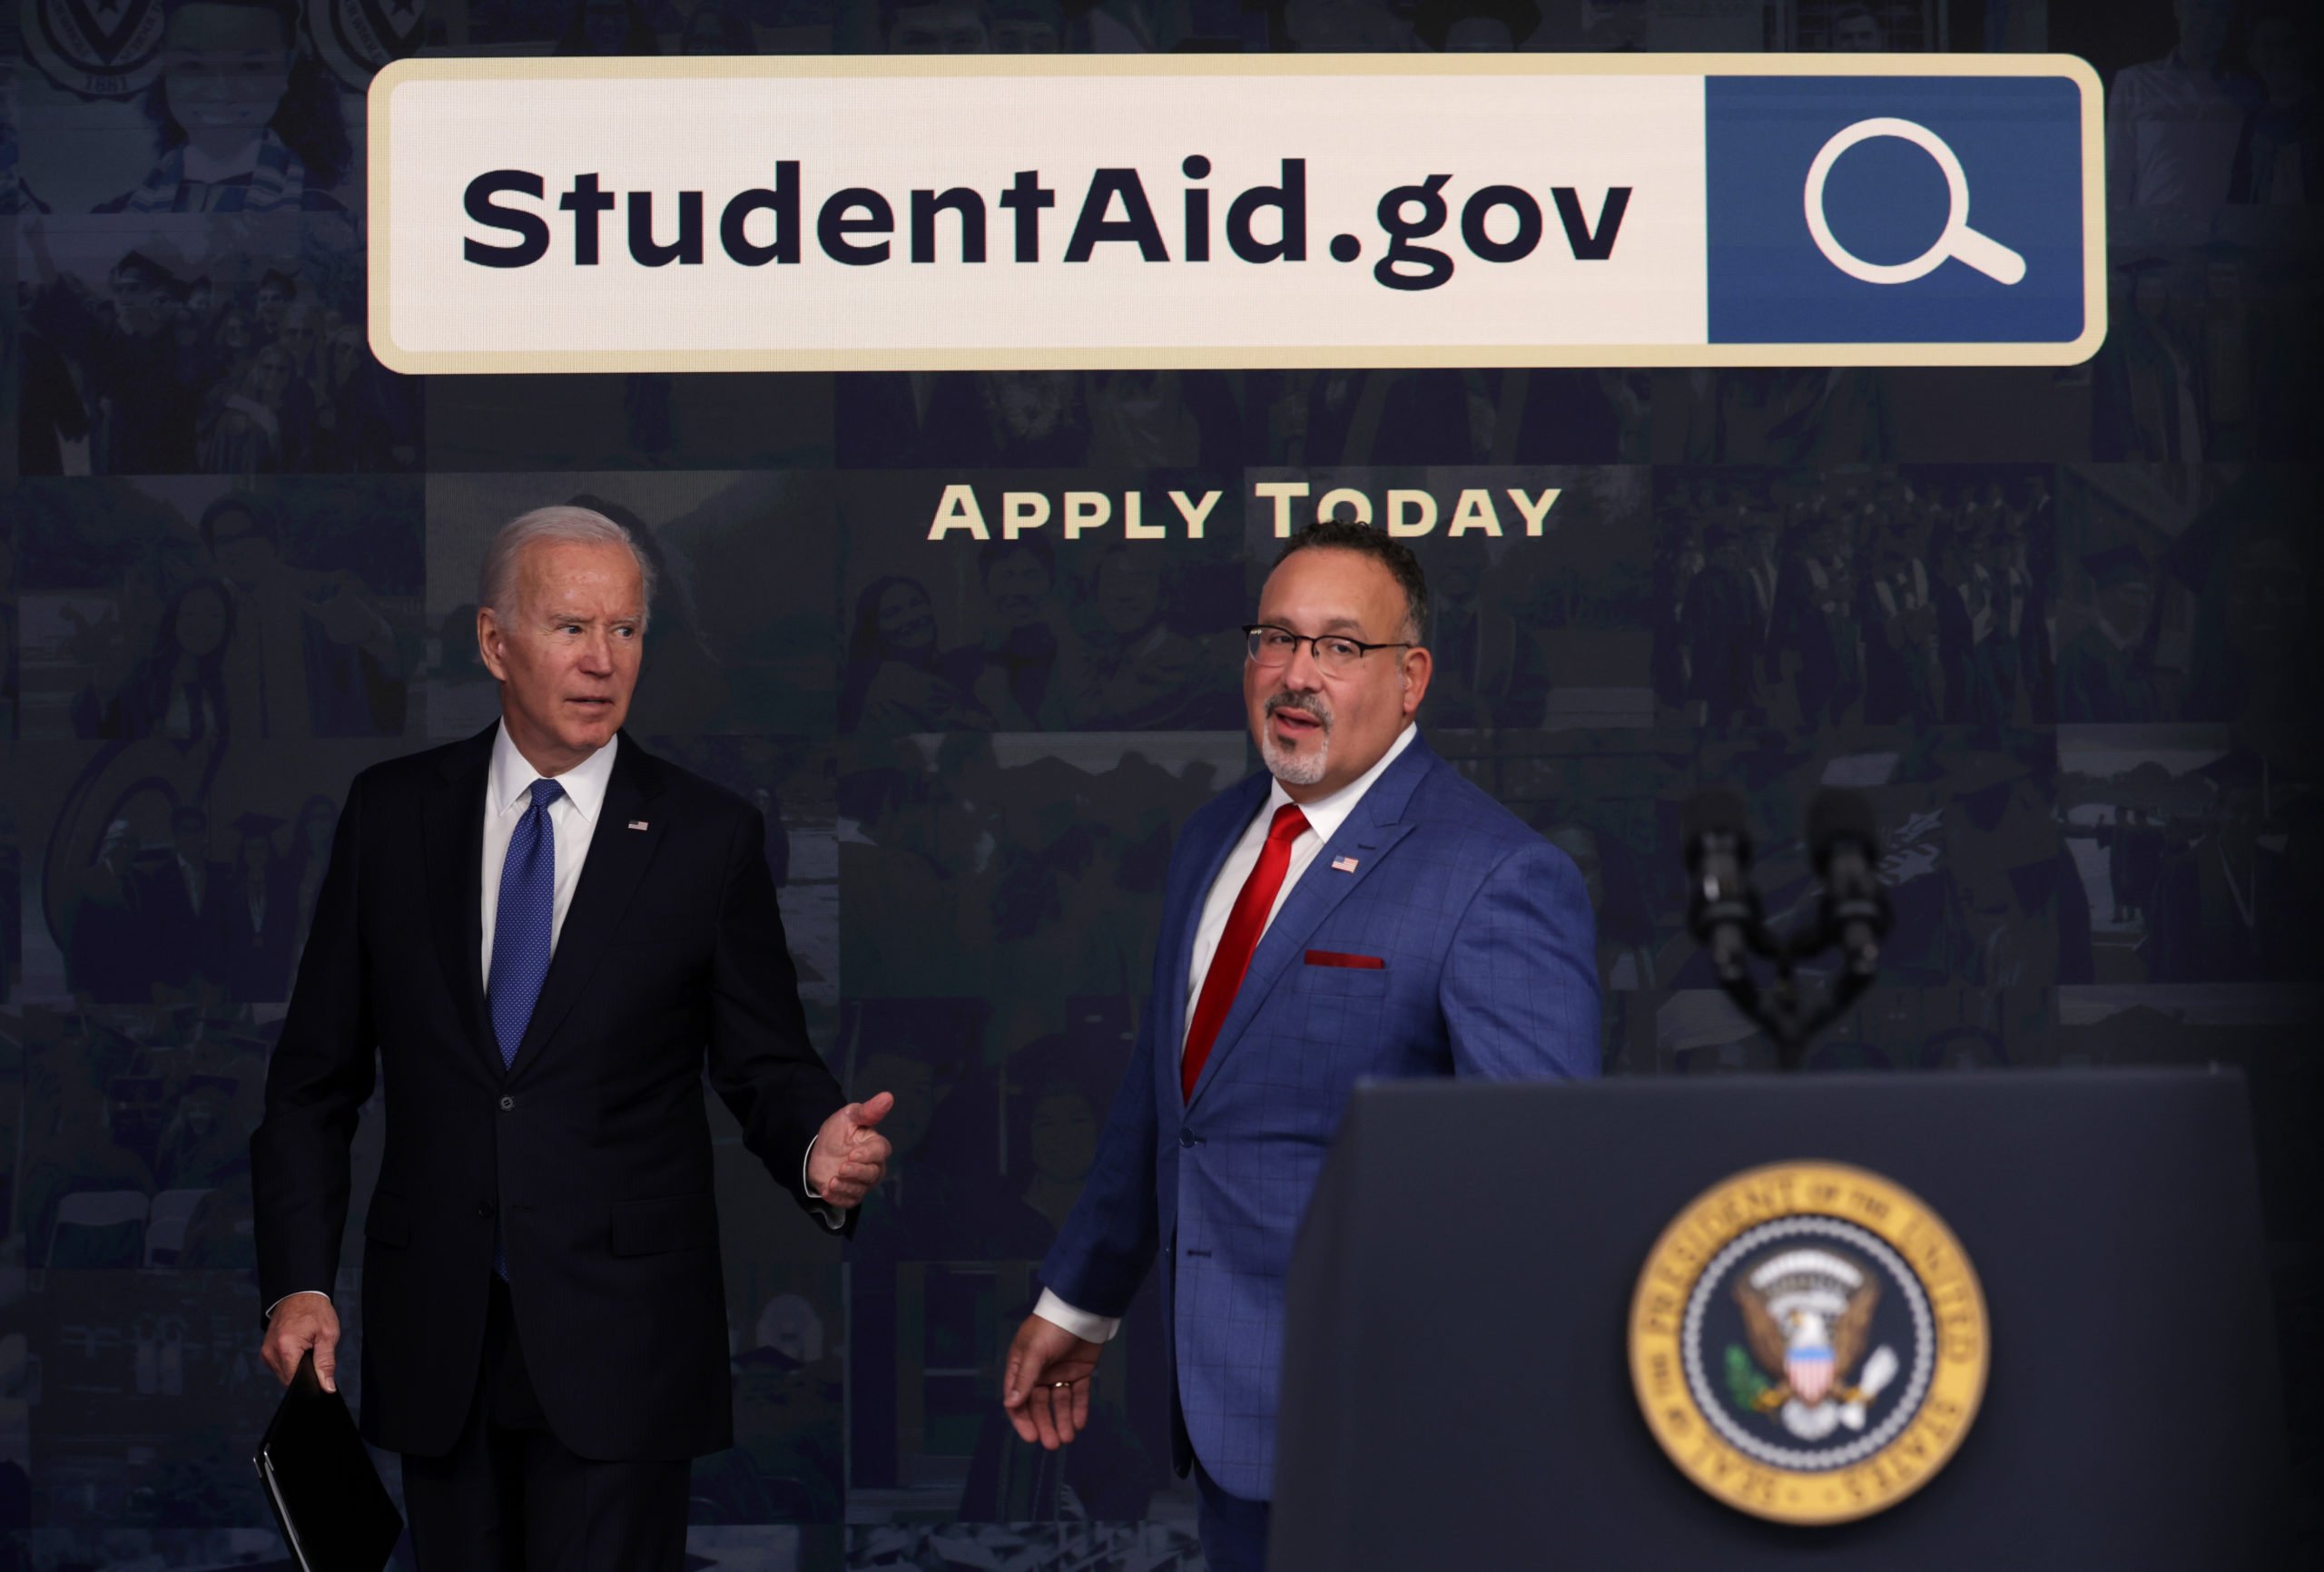 U.S. President Joe Biden and Secretary of Education Miguel Cardona (R) leave after Biden spoke on the student debt relief at the South Court Auditorium at Eisenhower Executive Office Building on October 17, 2022 in Washington, DC. President Biden gave an update on student debt relief portal beta test. (Photo by Alex Wong/Getty Images)